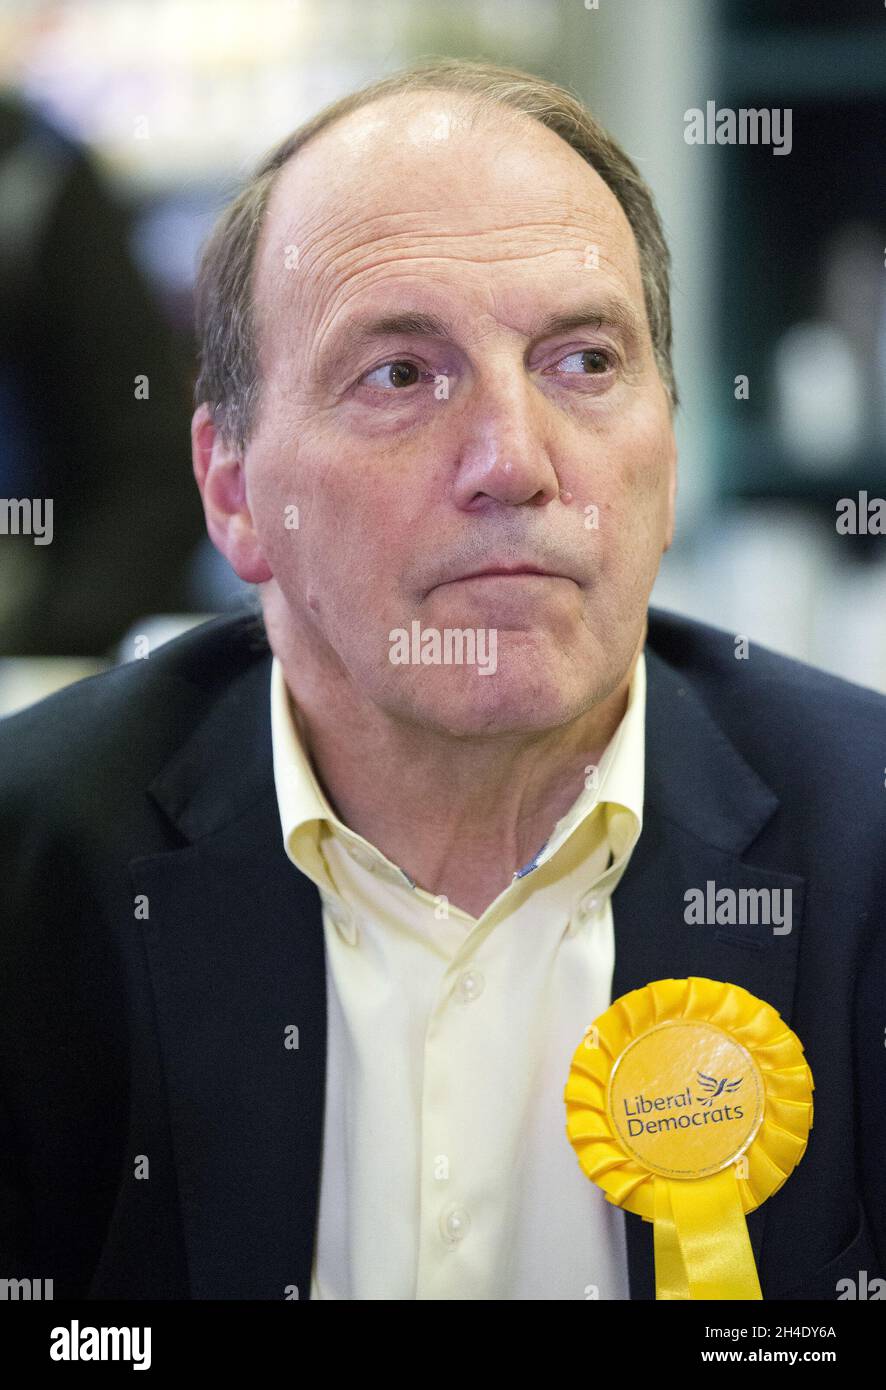 Former Liberal Democrats Bermondsey and Old Southwark MP Sir Simon Hughes visit an artisan bakery Comptoir Gourmand in Bermondsey, south London, during the campaign trail for the General Election next Thursday June 8. Picture dated: , Tuesday May 30, 2017. Photo credit should read: Isabel Infantes / EMPICS Entertainment. Stock Photo